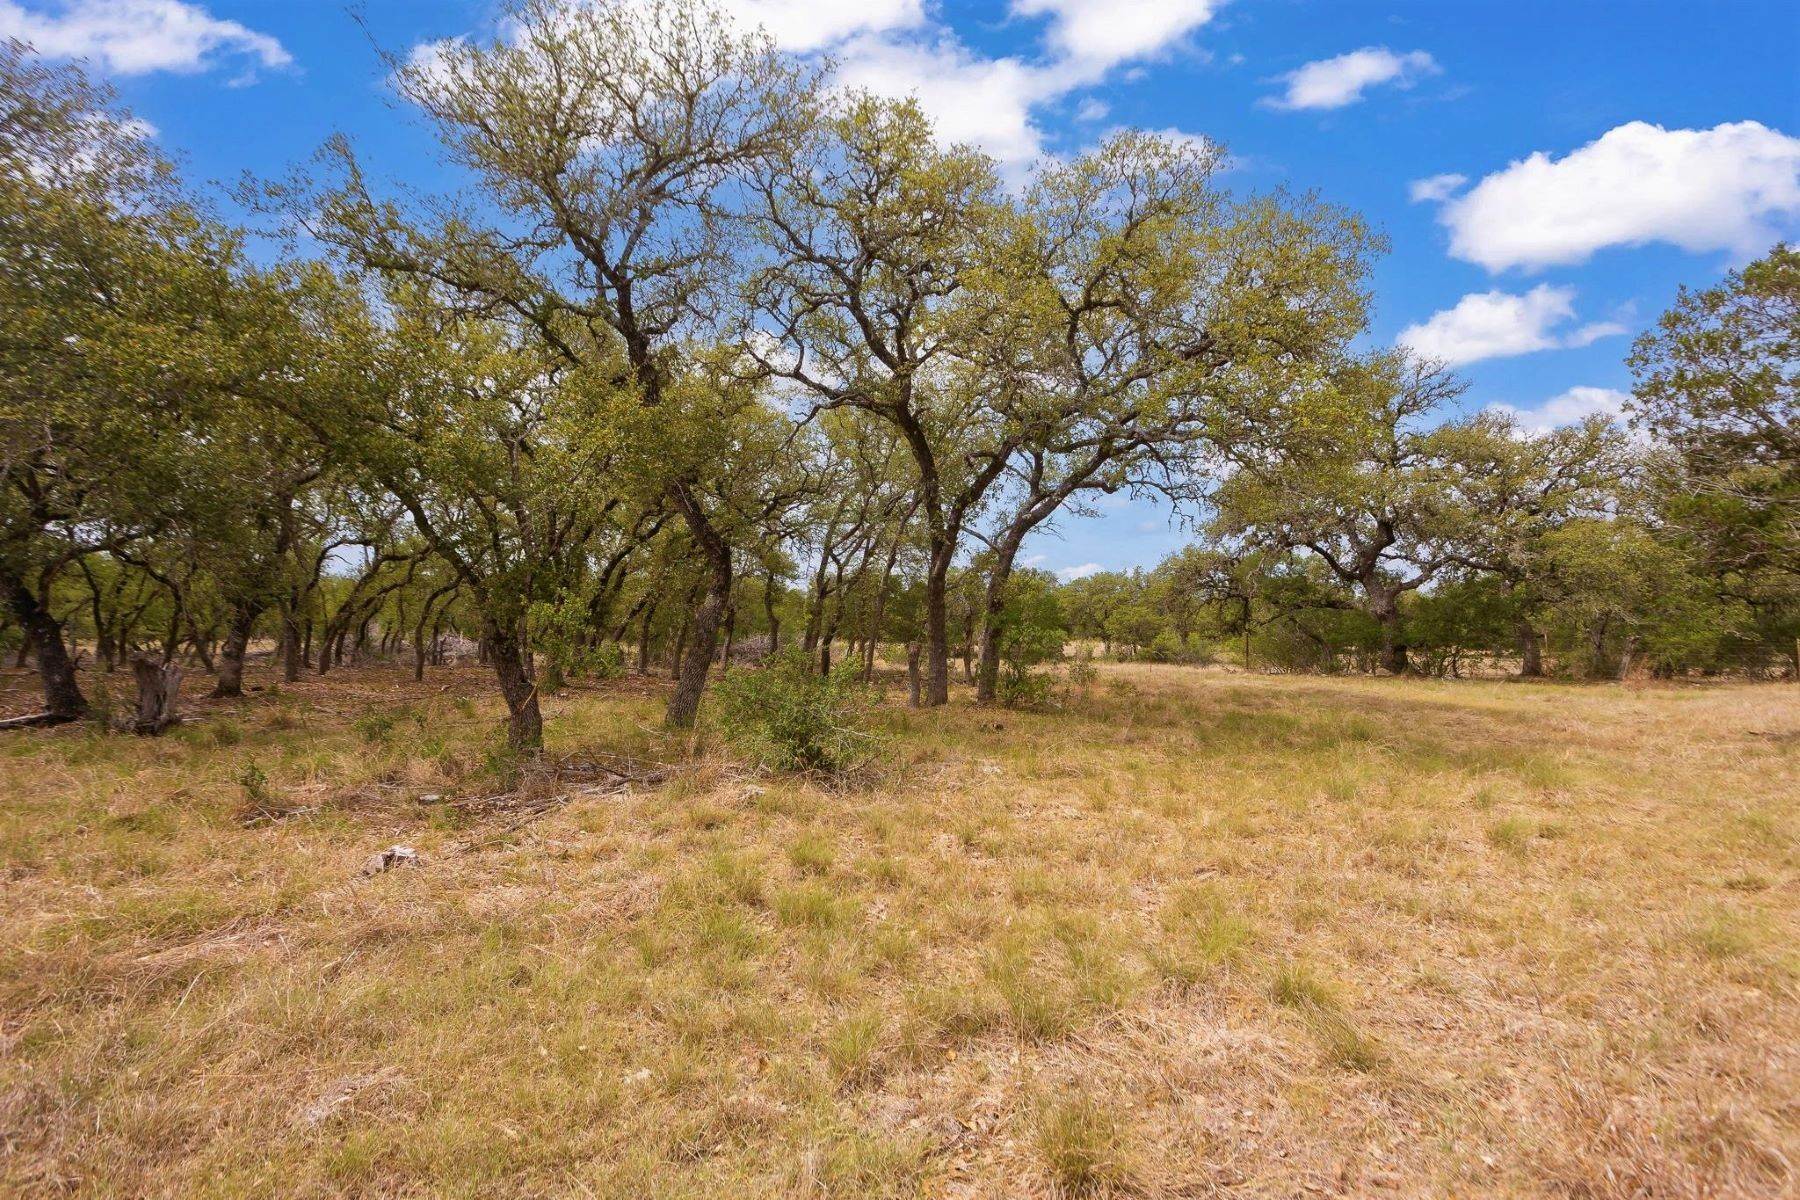 11. Farm and Ranch Properties at 233 Kasten Road, Tract C Boerne, Texas 78006 United States